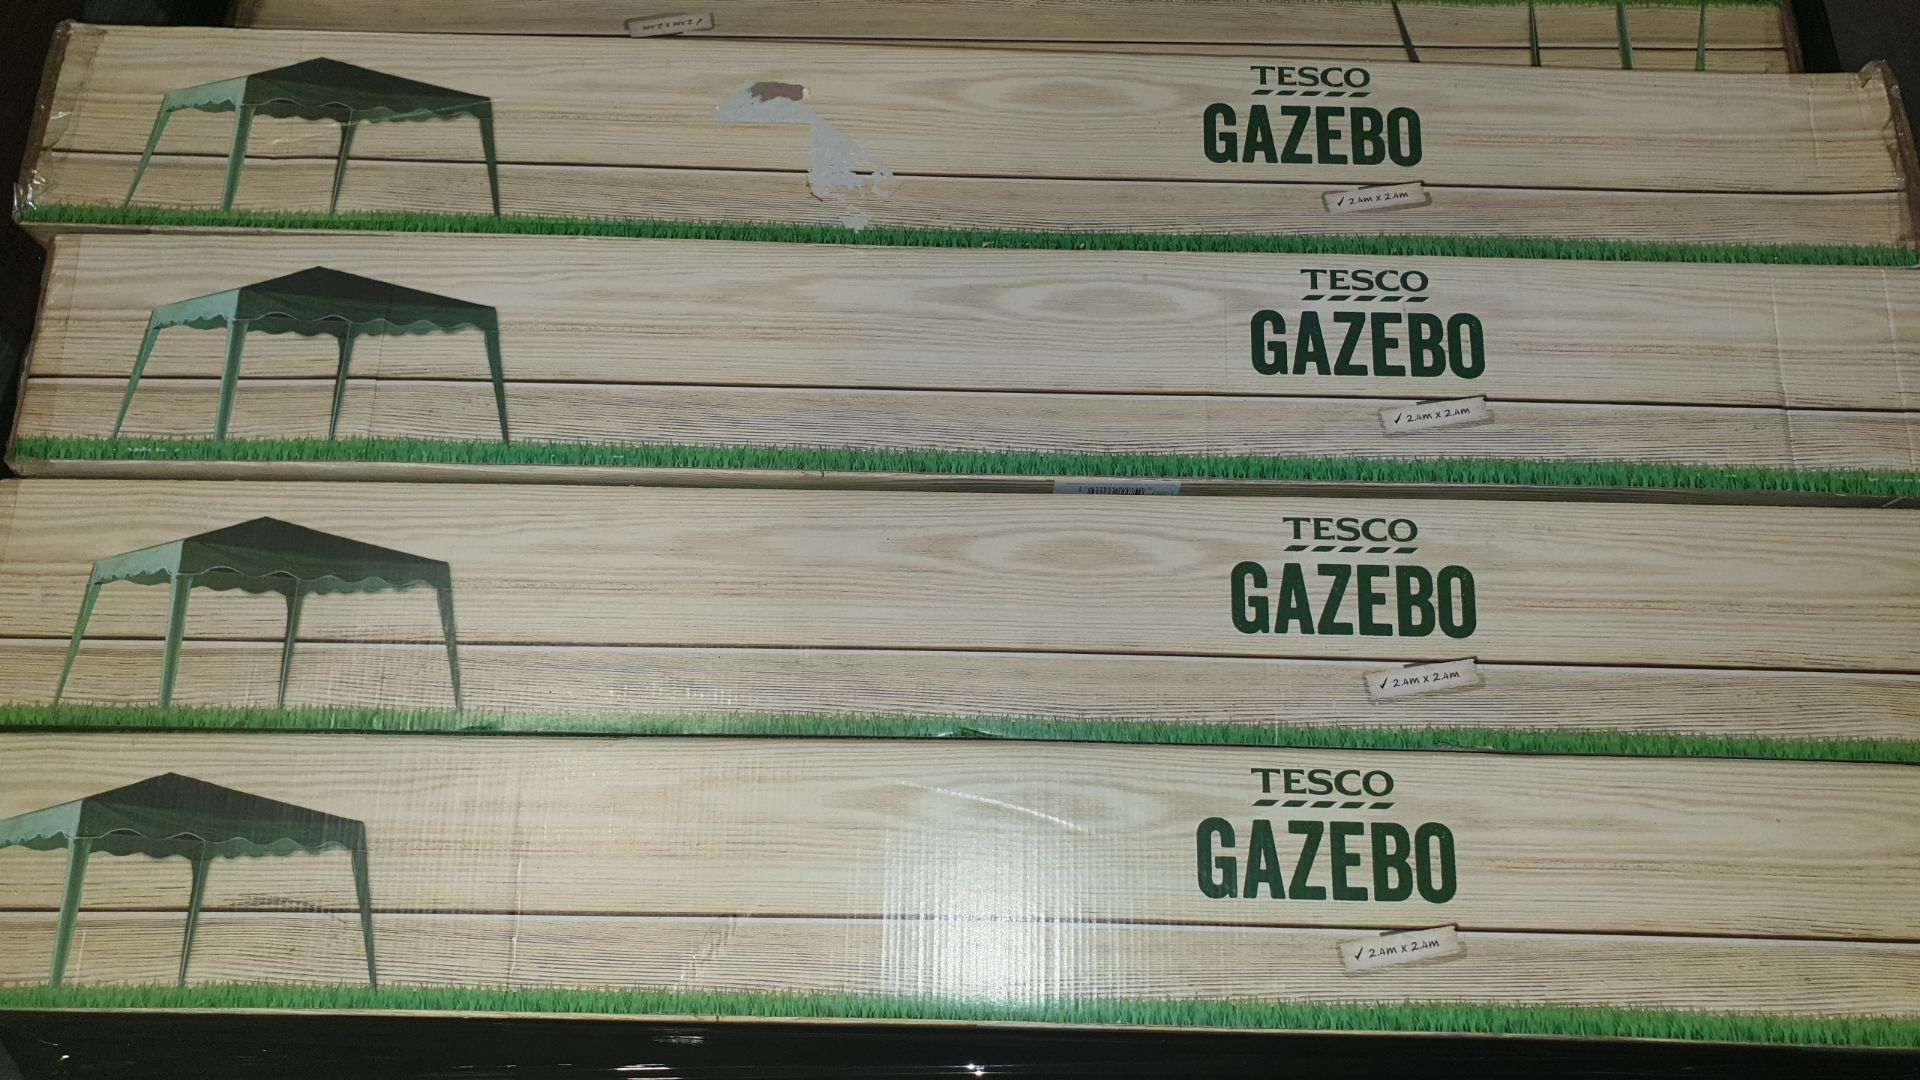 (LOT FOR THURSDAY 28TH MAY AUCTION) 6 X GREEN GAZEBOS 2.4 X 2.4 M (NOTE SOME BOXES ARE DAMAGED)